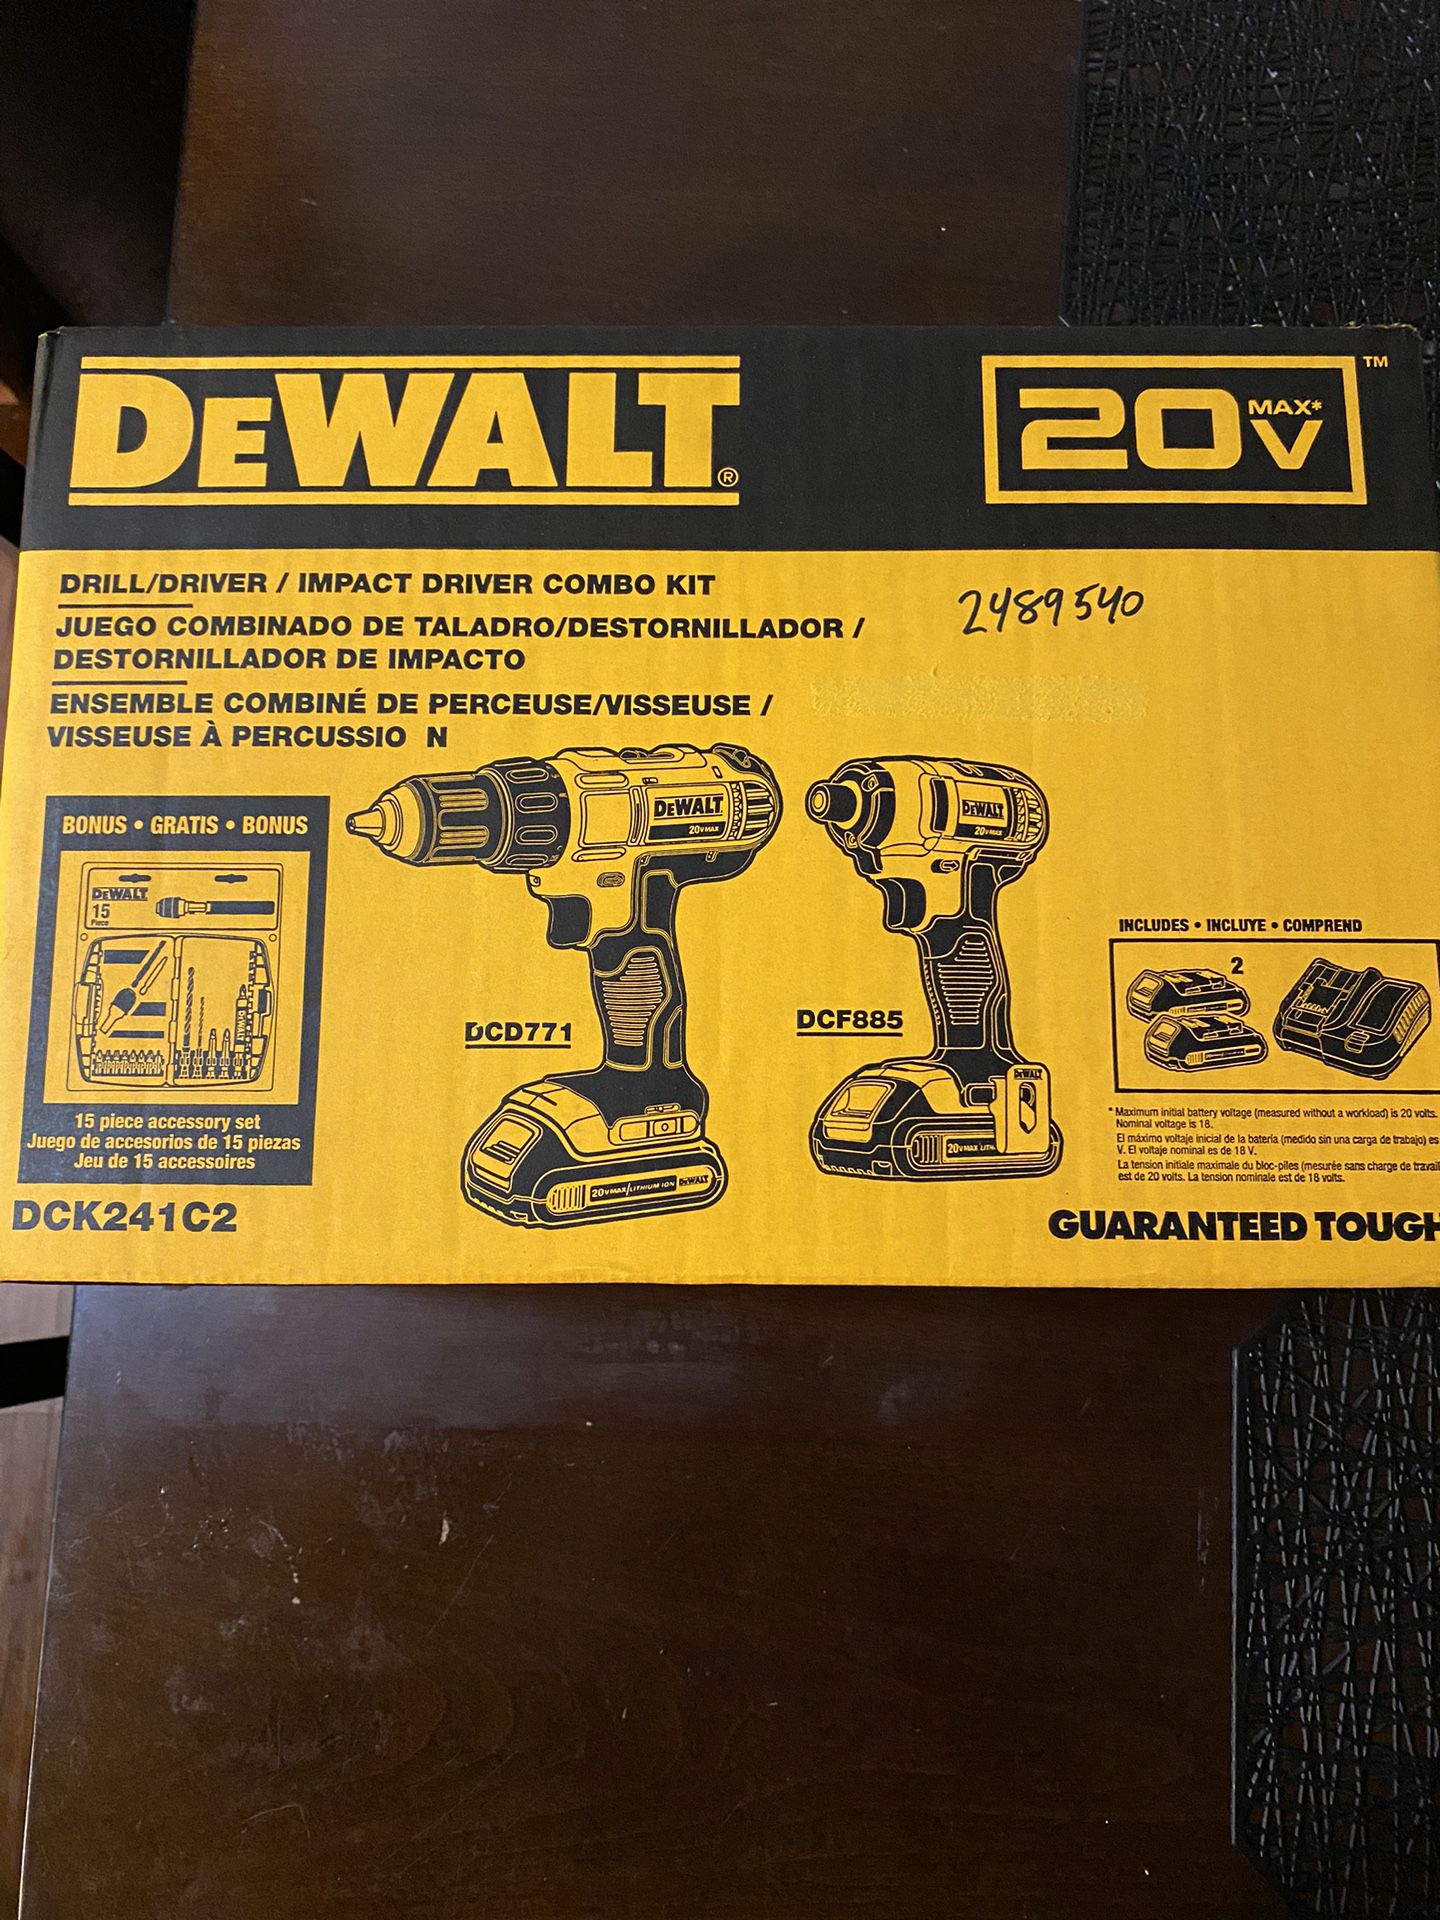 DEWALT 20V Max Cordless Brushed 2 Tool Compact Drill And Impact Driver Kit